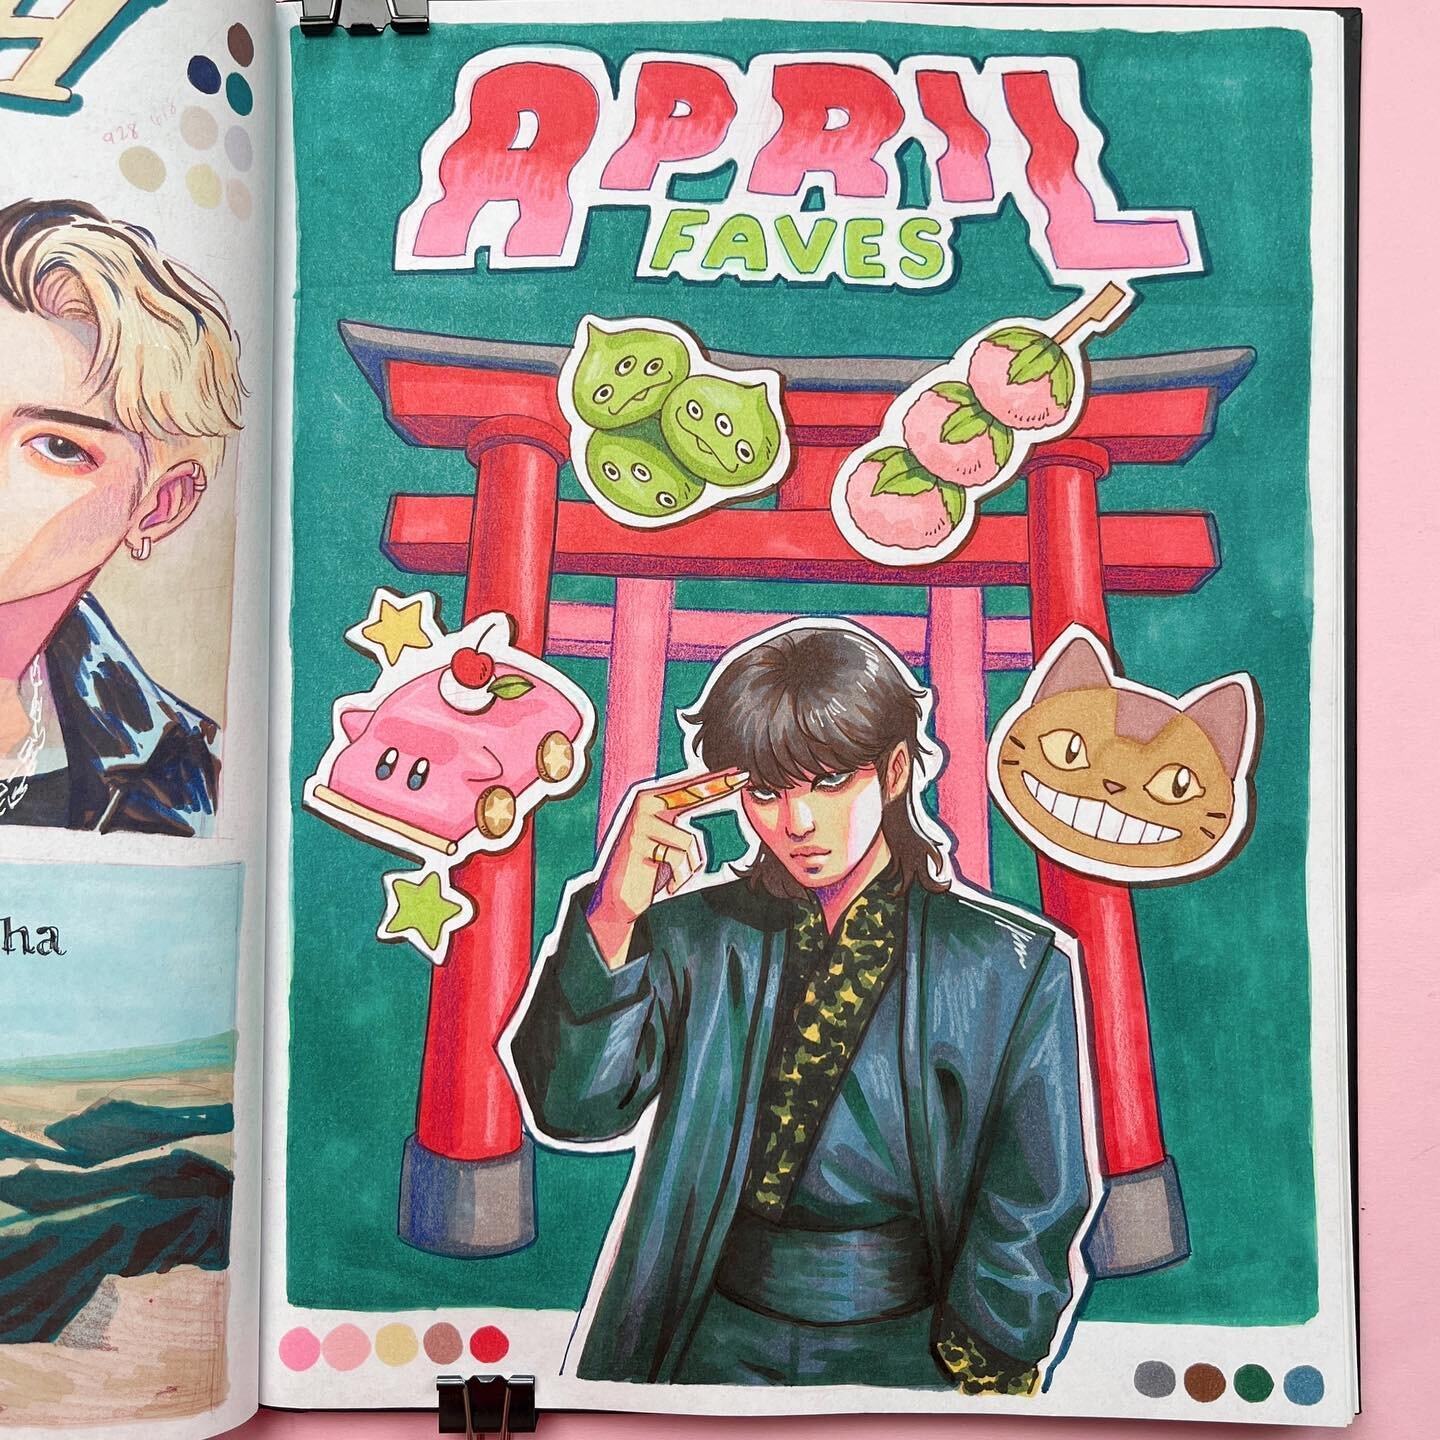 APRIL FAVOURITES
Someone during the livestream said it looked like he was summoning cute snacks 😂
Different composition from my usual fave sketchbook spreads! This time around it consists of various things to indicate my Japan trip + &ldquo;Super&rd